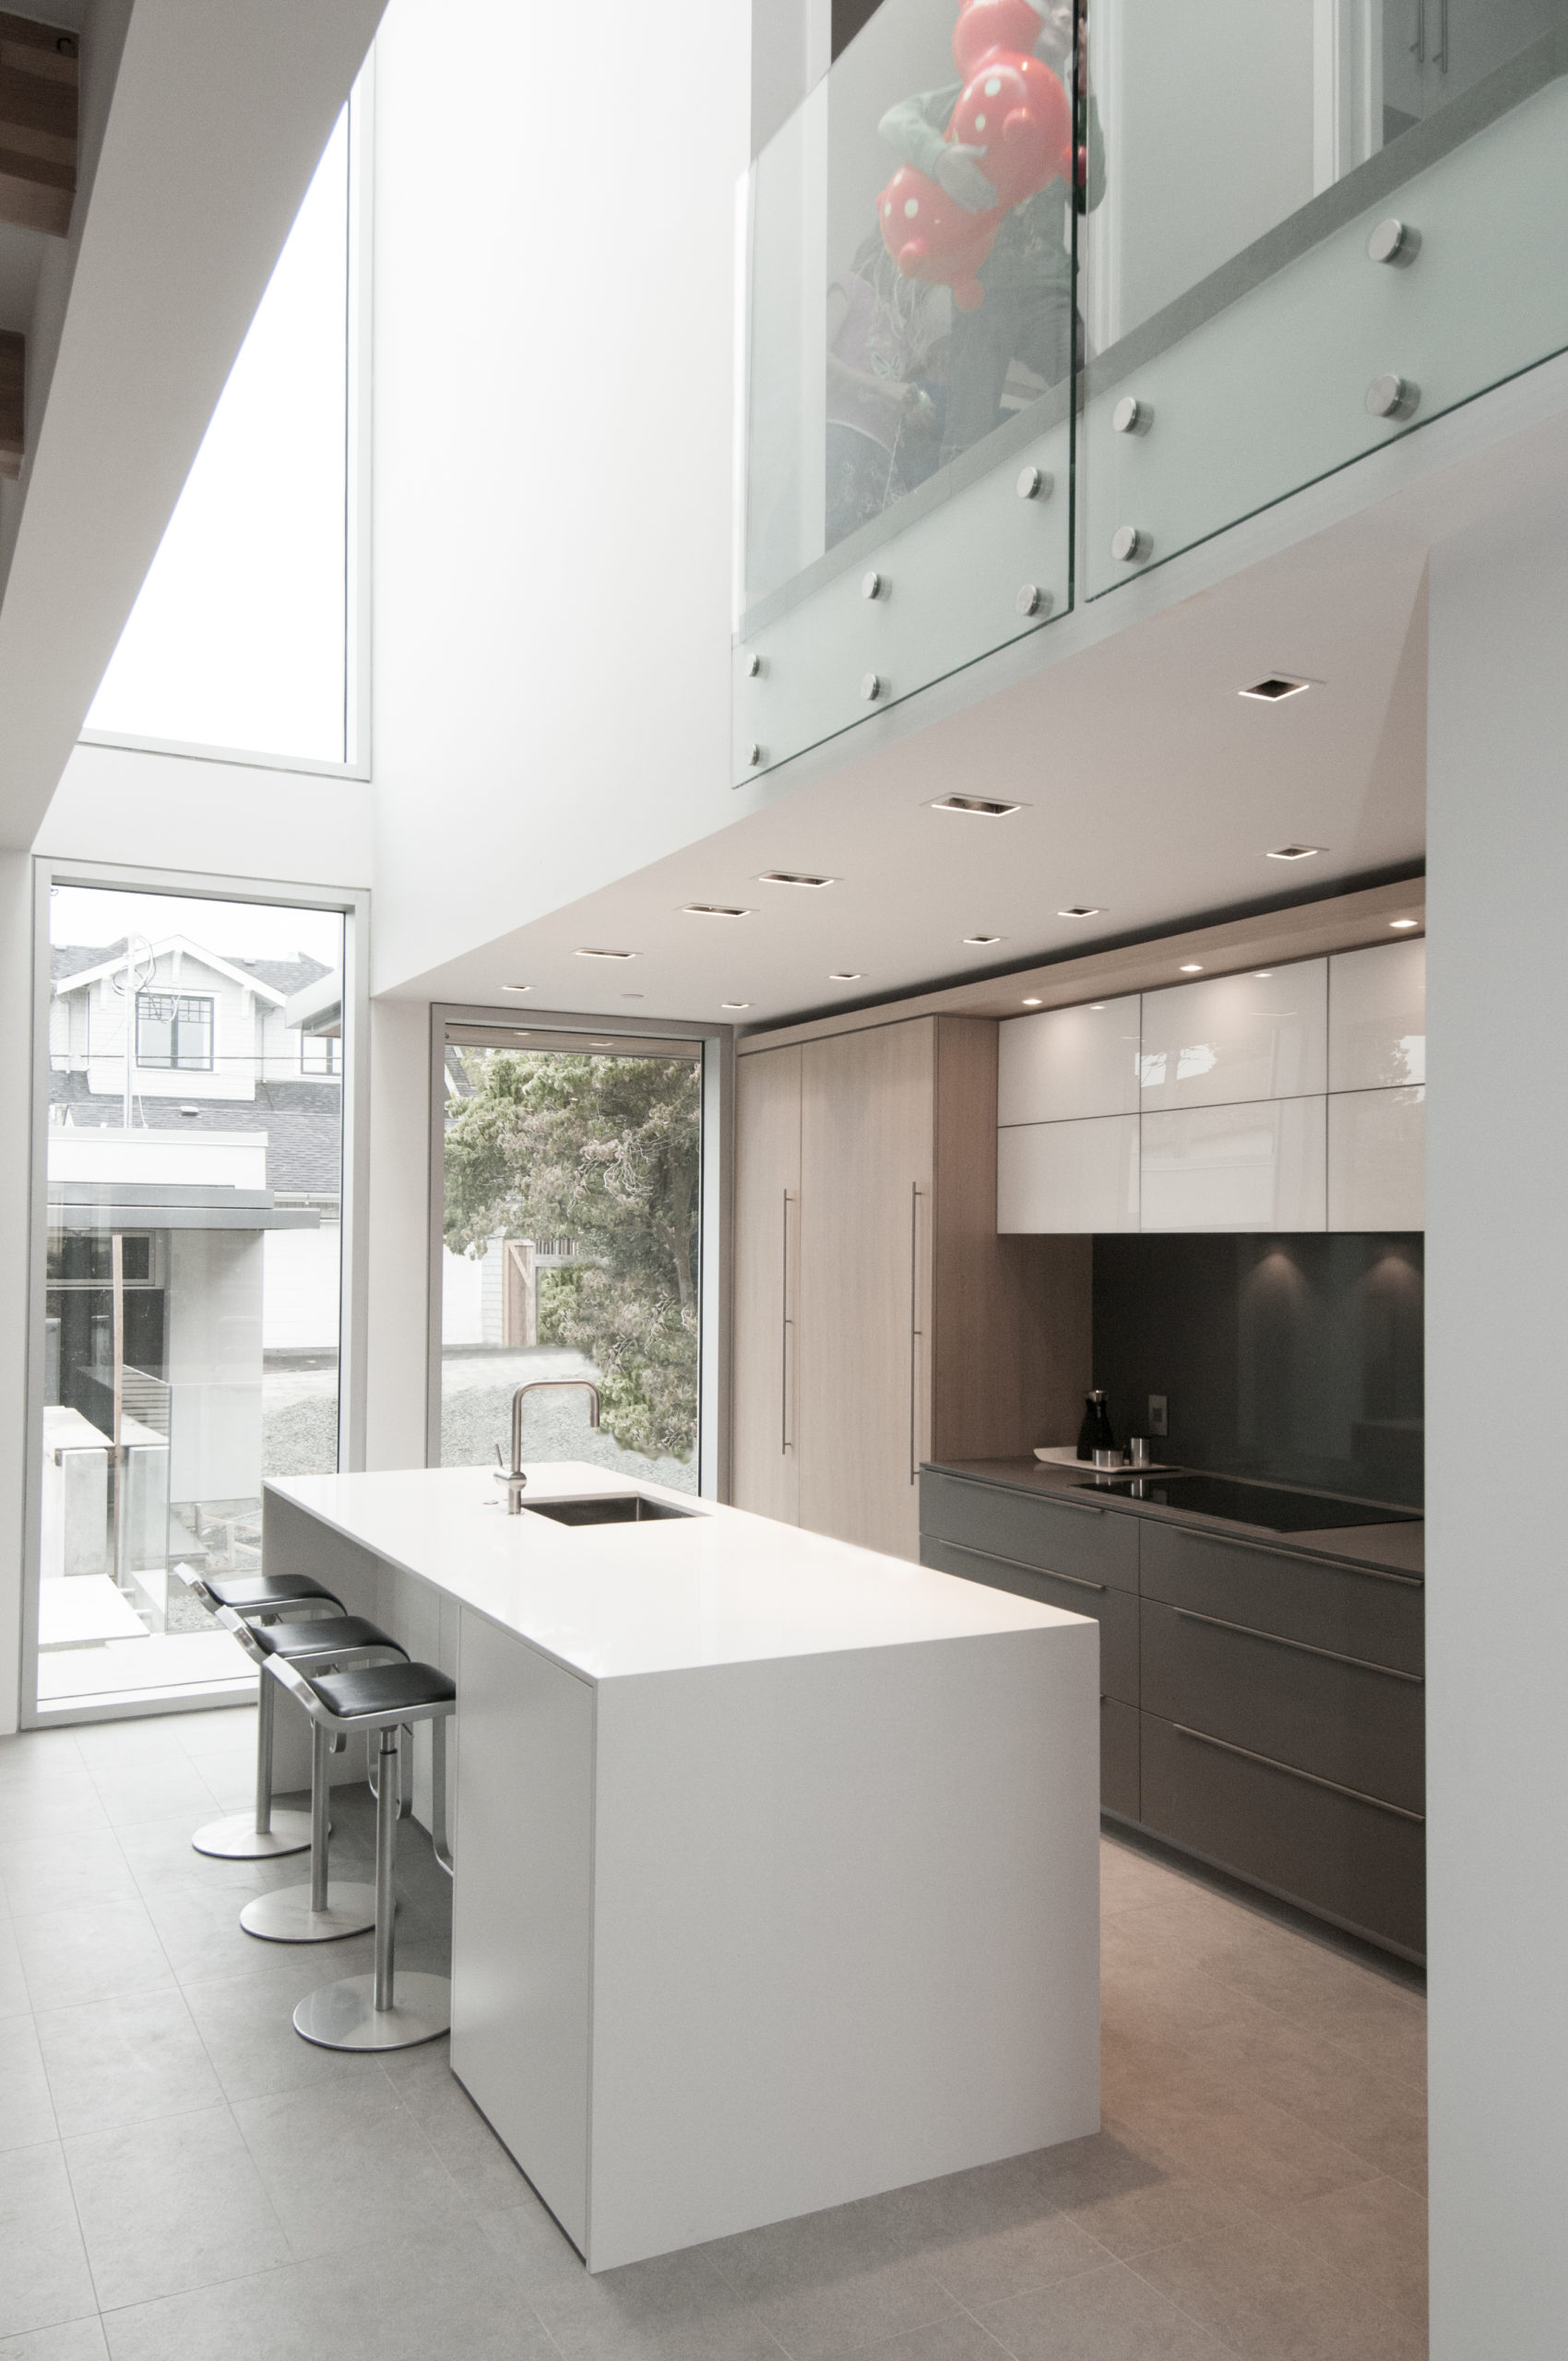 Kitchen with a clean and modern design at a Vancouver custom home.